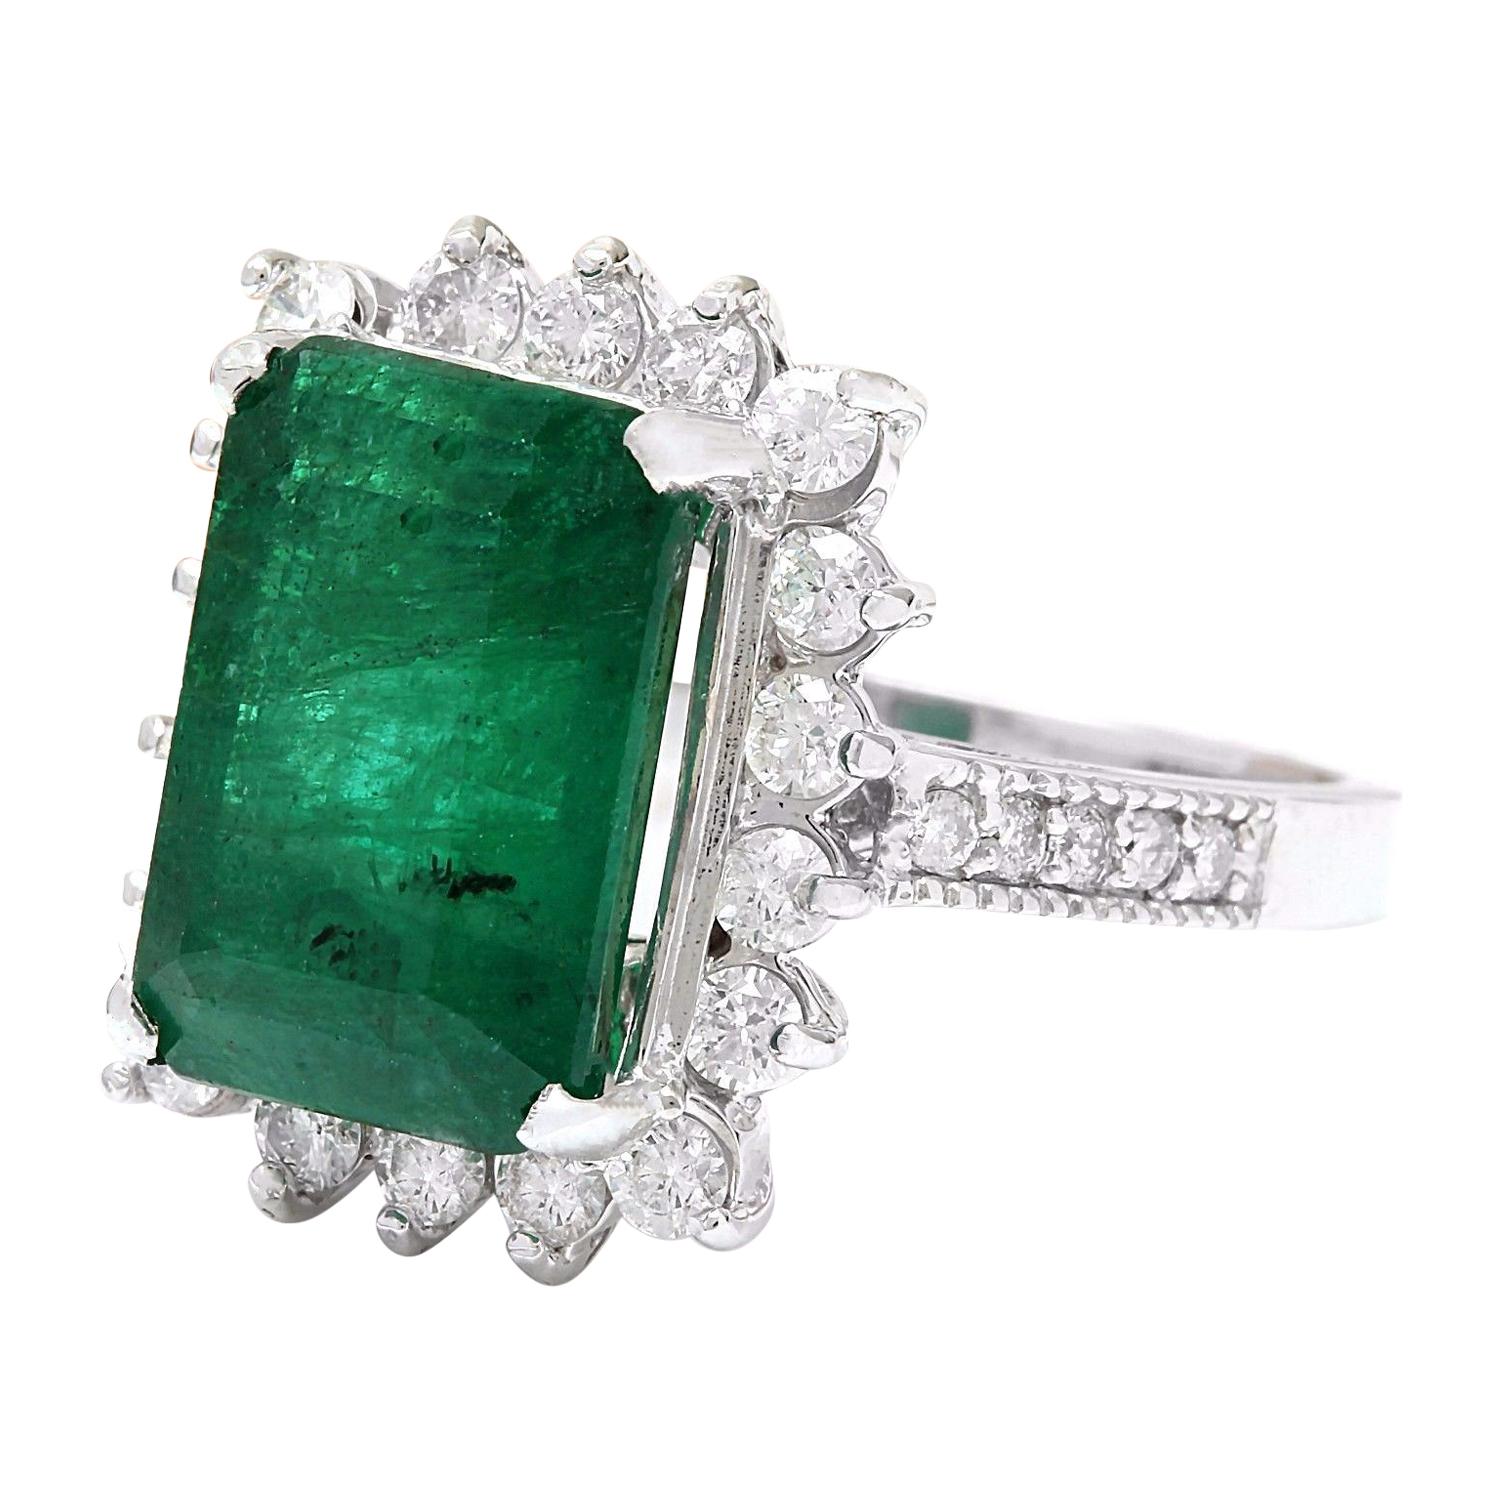 Introducing our exquisite 7.28 Carat Natural Emerald 14K Solid White Gold Diamond Ring, a masterpiece of elegance and sophistication. Meticulously crafted from 14K White Gold, this ring is both luxurious and timeless.
At its center lies a